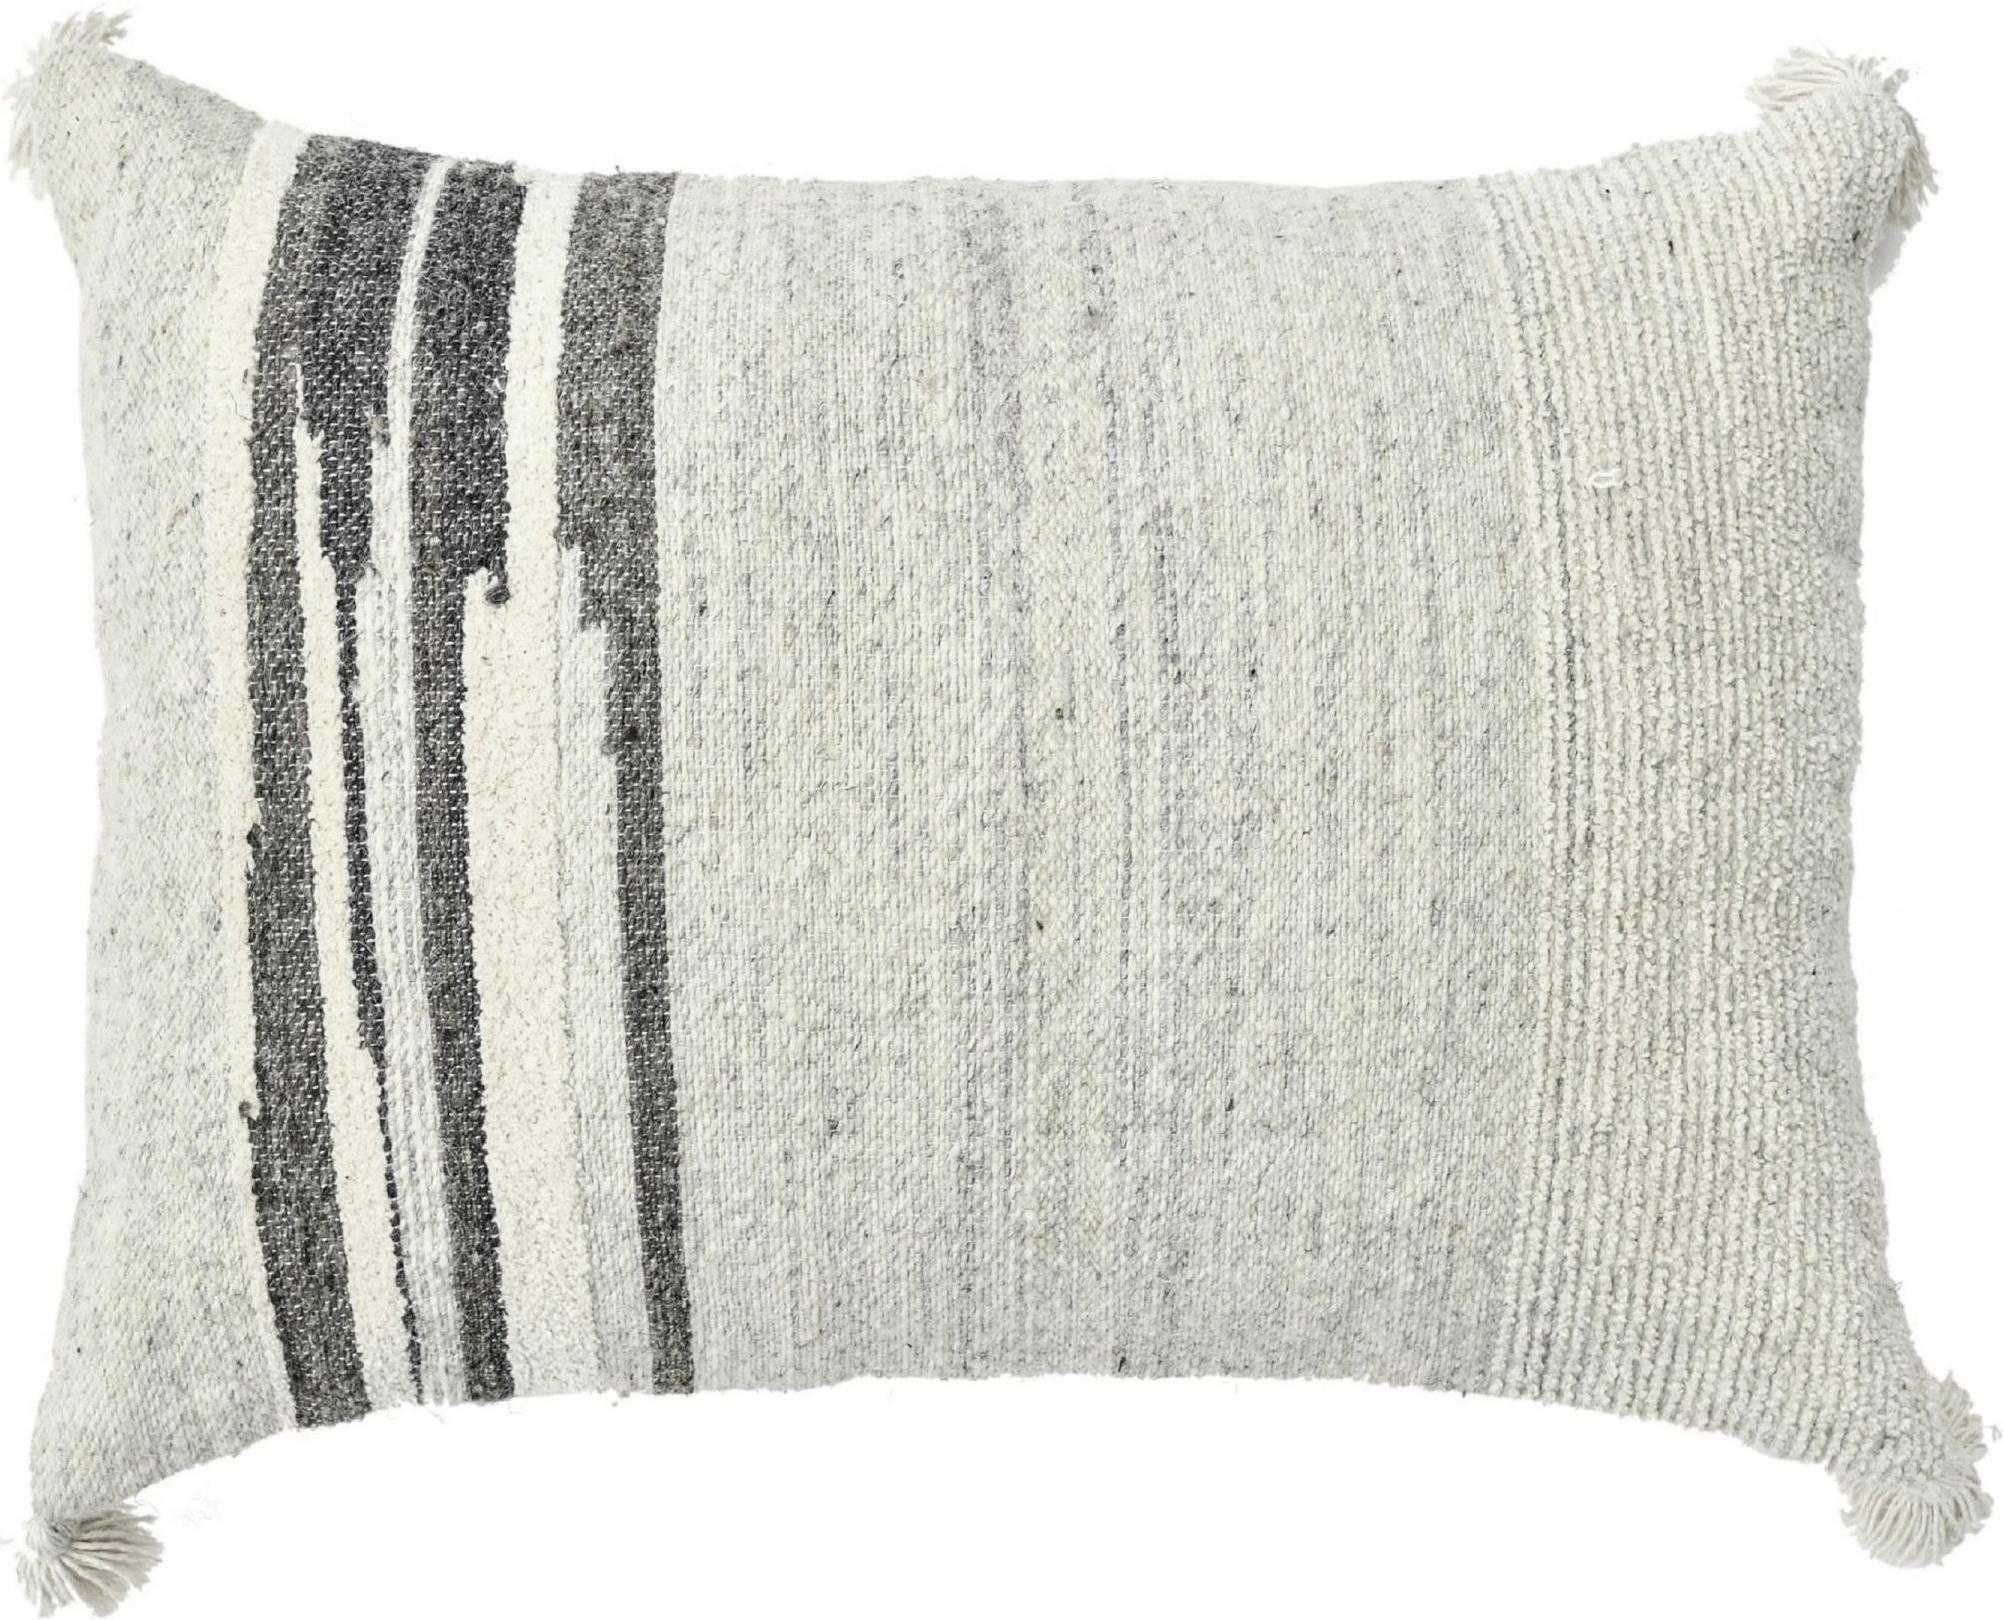 Hand-Knotted Ivory Modern Boho Chic Style Wool and Cotton Pillow For Sale